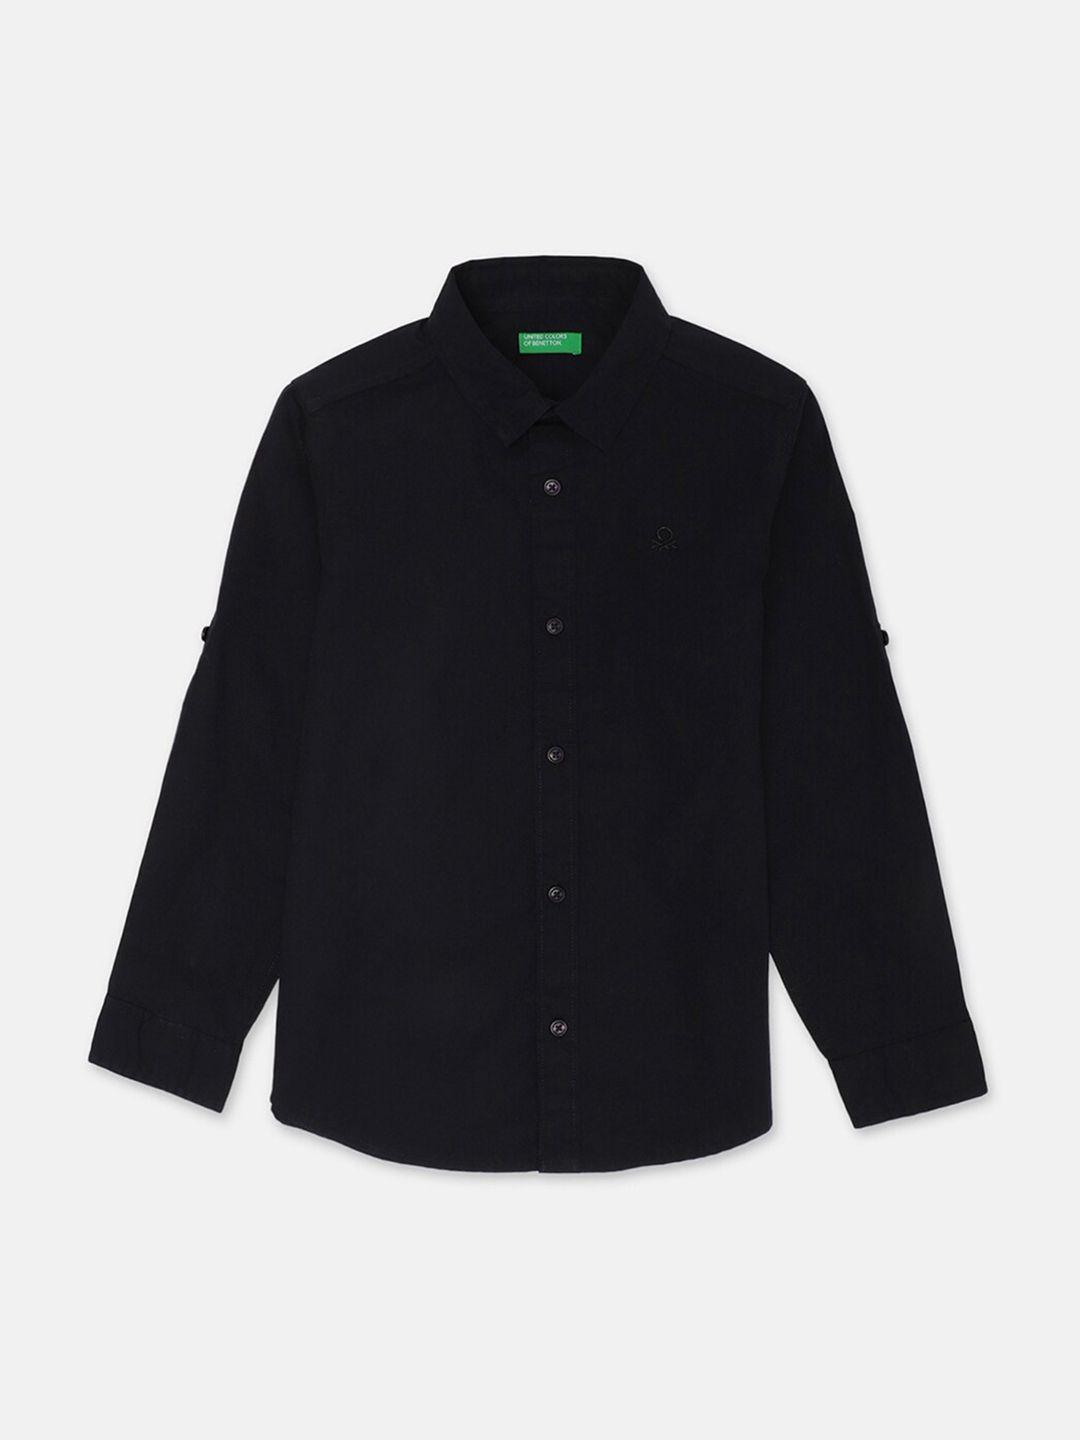 United Colors of Benetton Boys Black Solid Casual Shirt